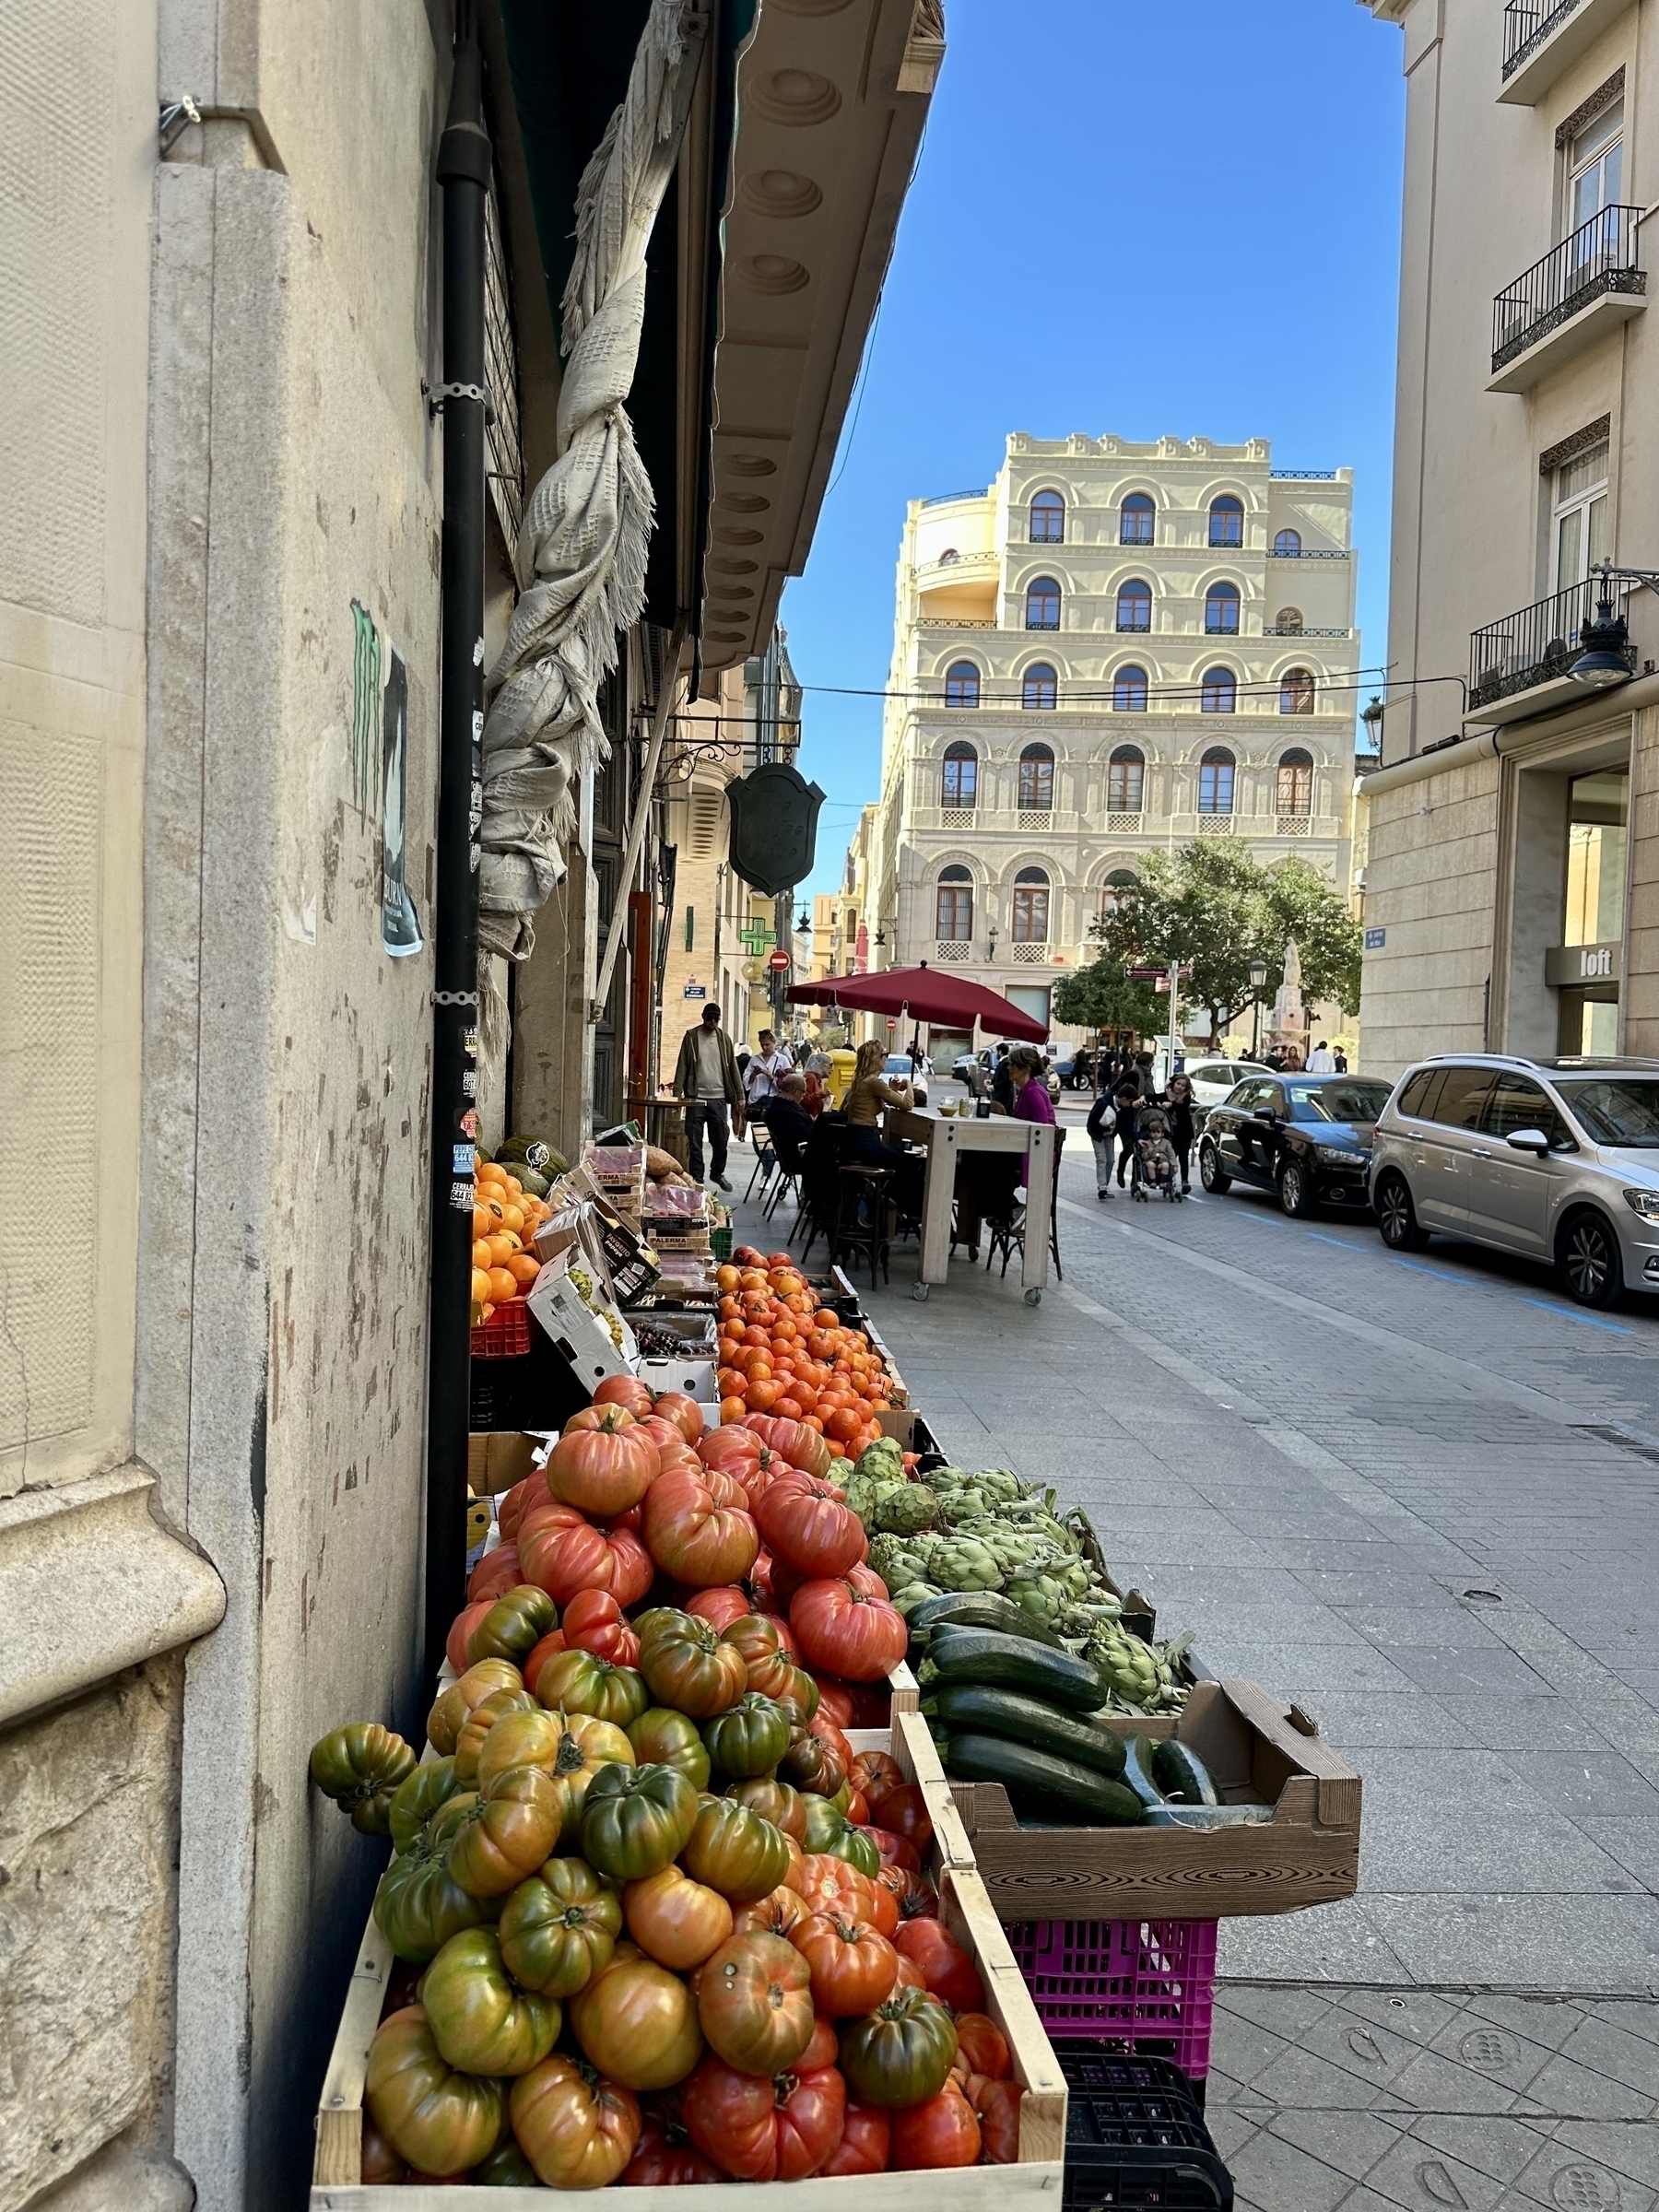 Outdoor vegetable stand on a narrow street. A restaurant patio full of guests is in the background.